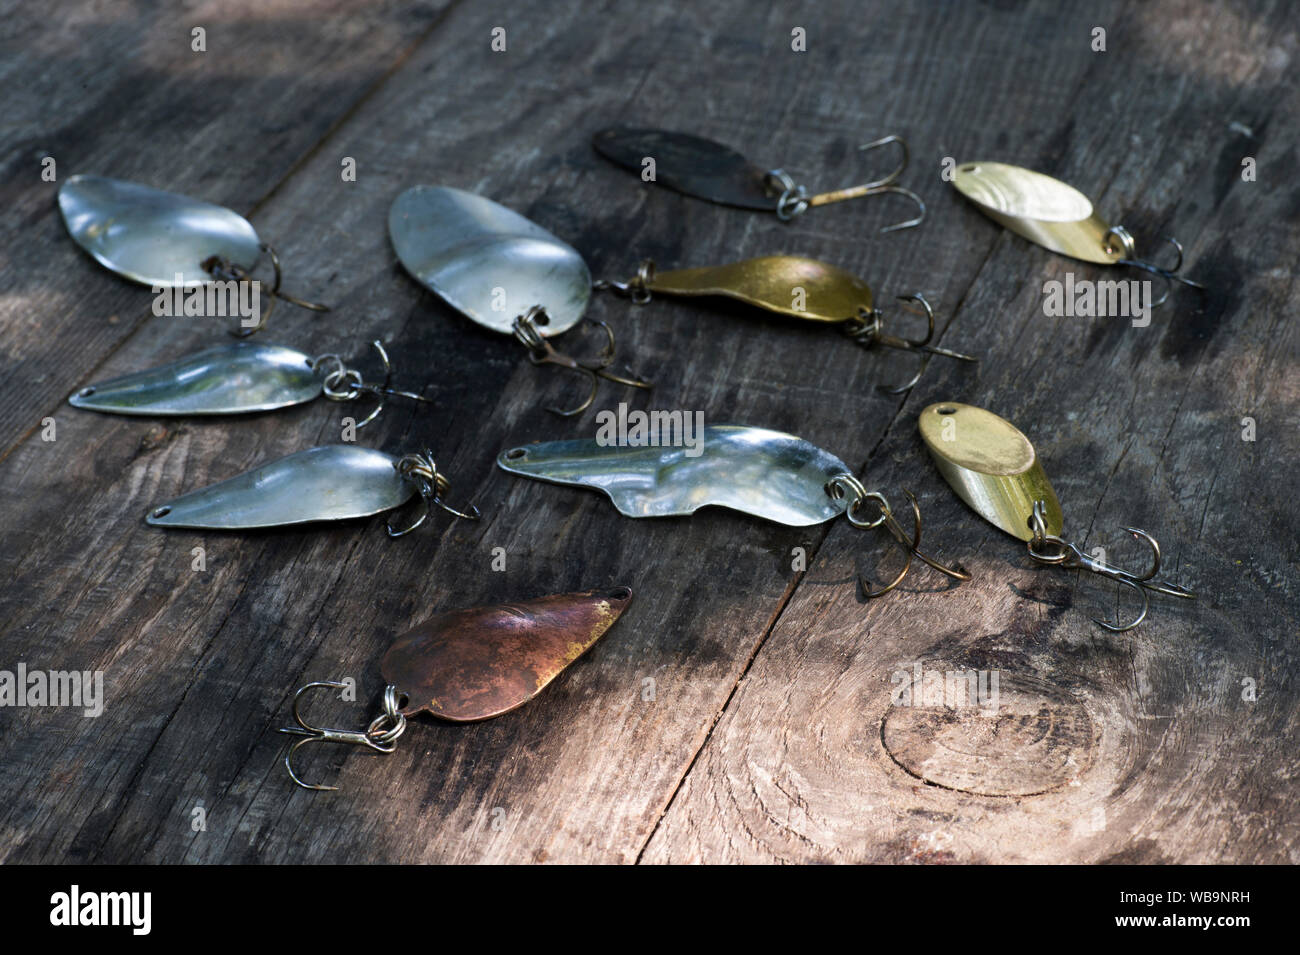 https://c8.alamy.com/comp/WB9NRH/metal-spinners-in-the-shape-of-a-spoon-of-different-colors-for-catching-a-predator-on-a-vintage-wooden-background-the-concept-of-choosing-bait-for-di-WB9NRH.jpg